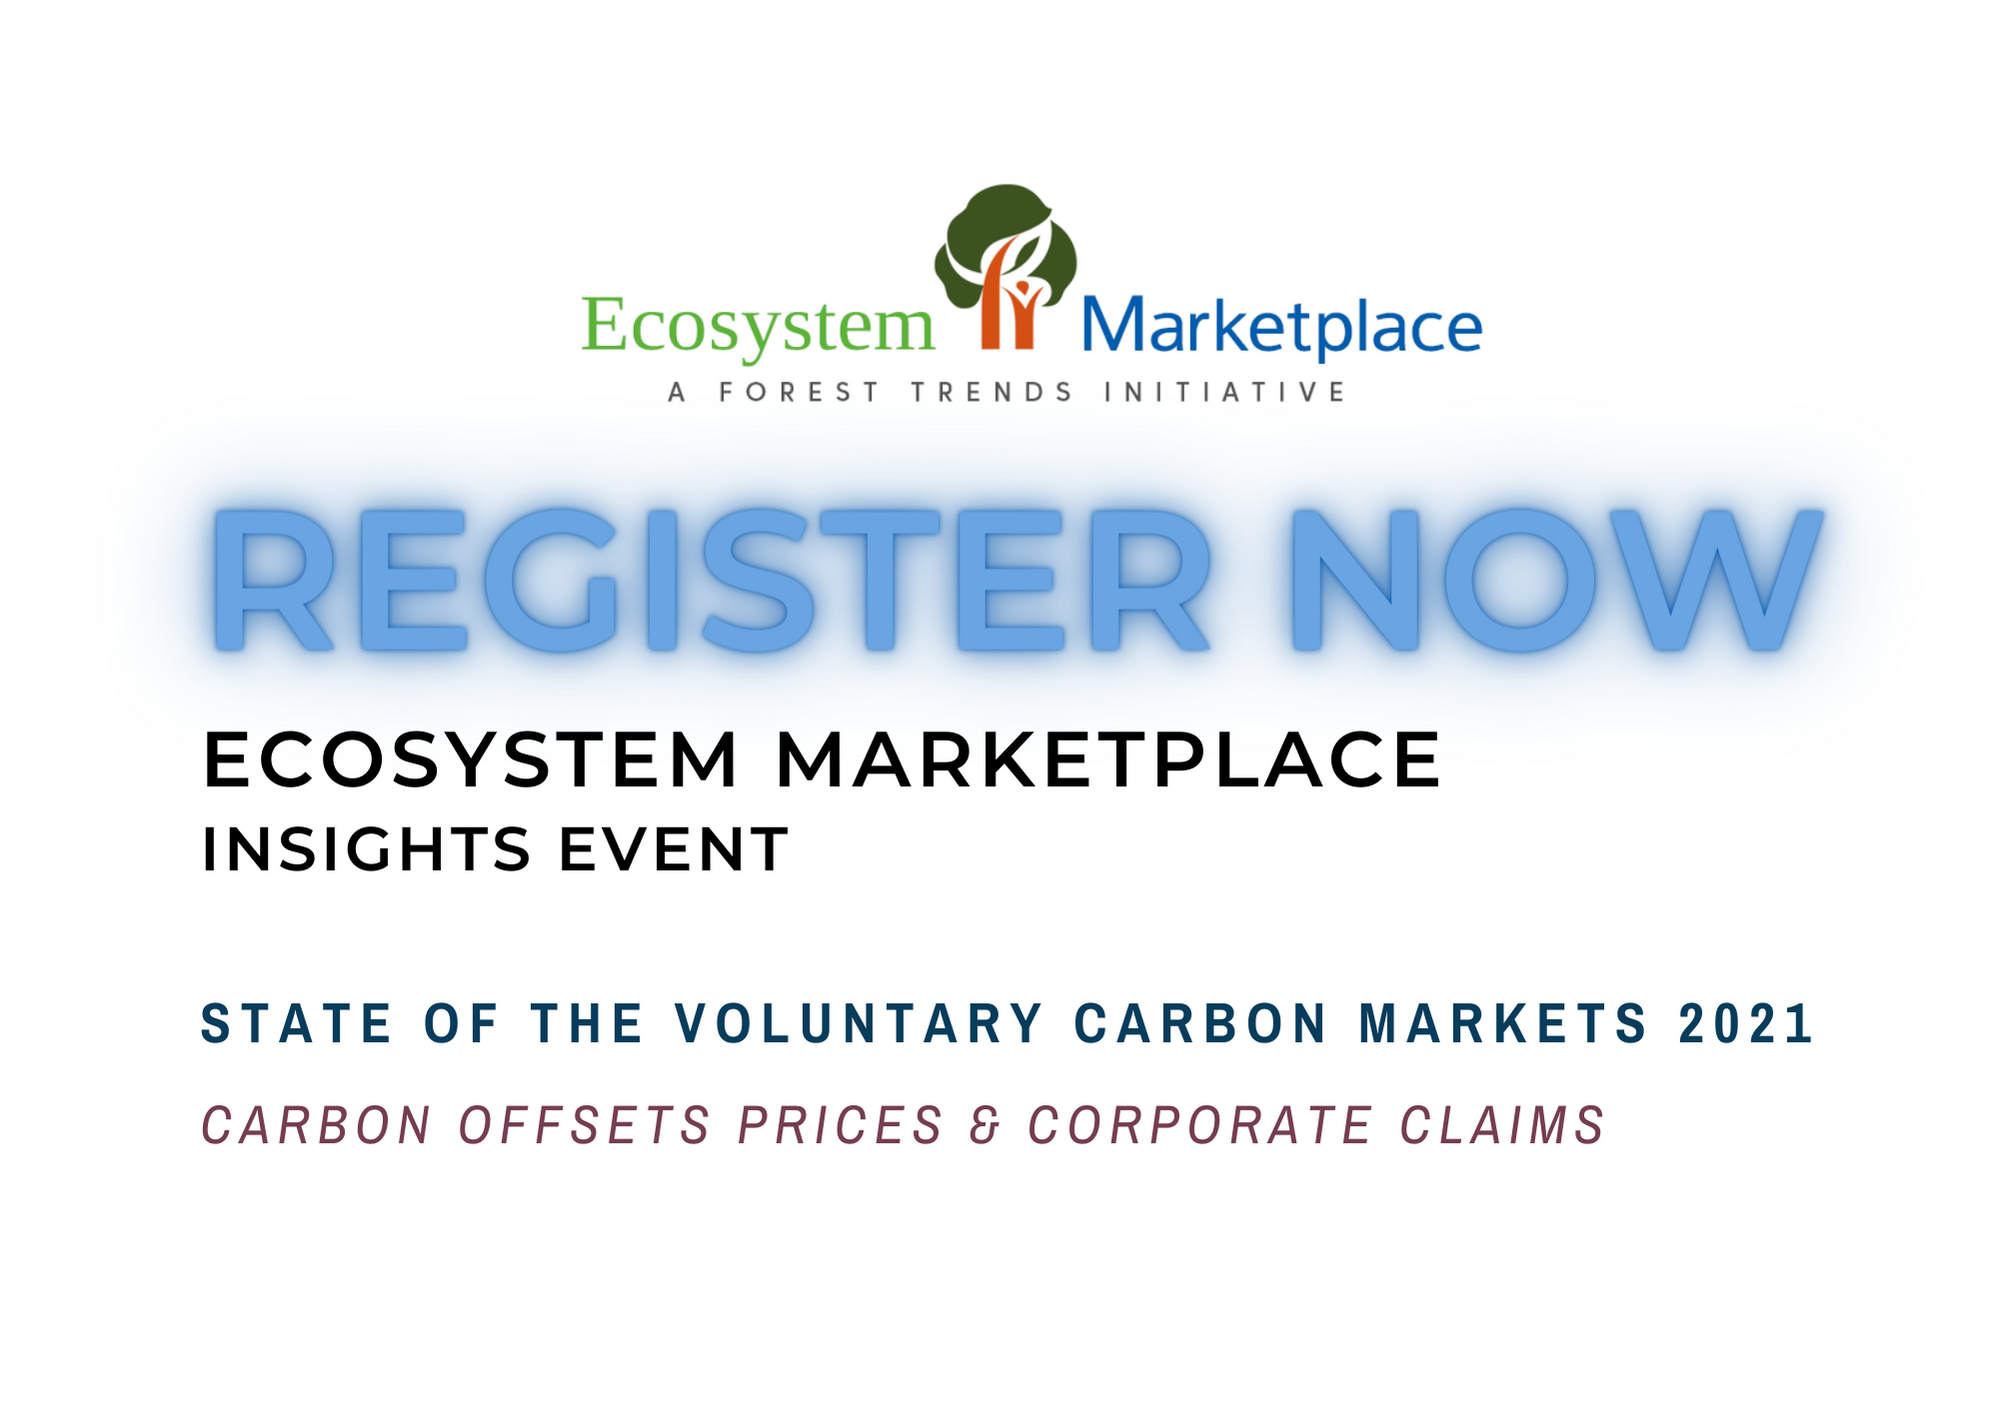 21 Countries Are Reducing Carbon Emissions While Growing GDP - Ecosystem  Marketplace